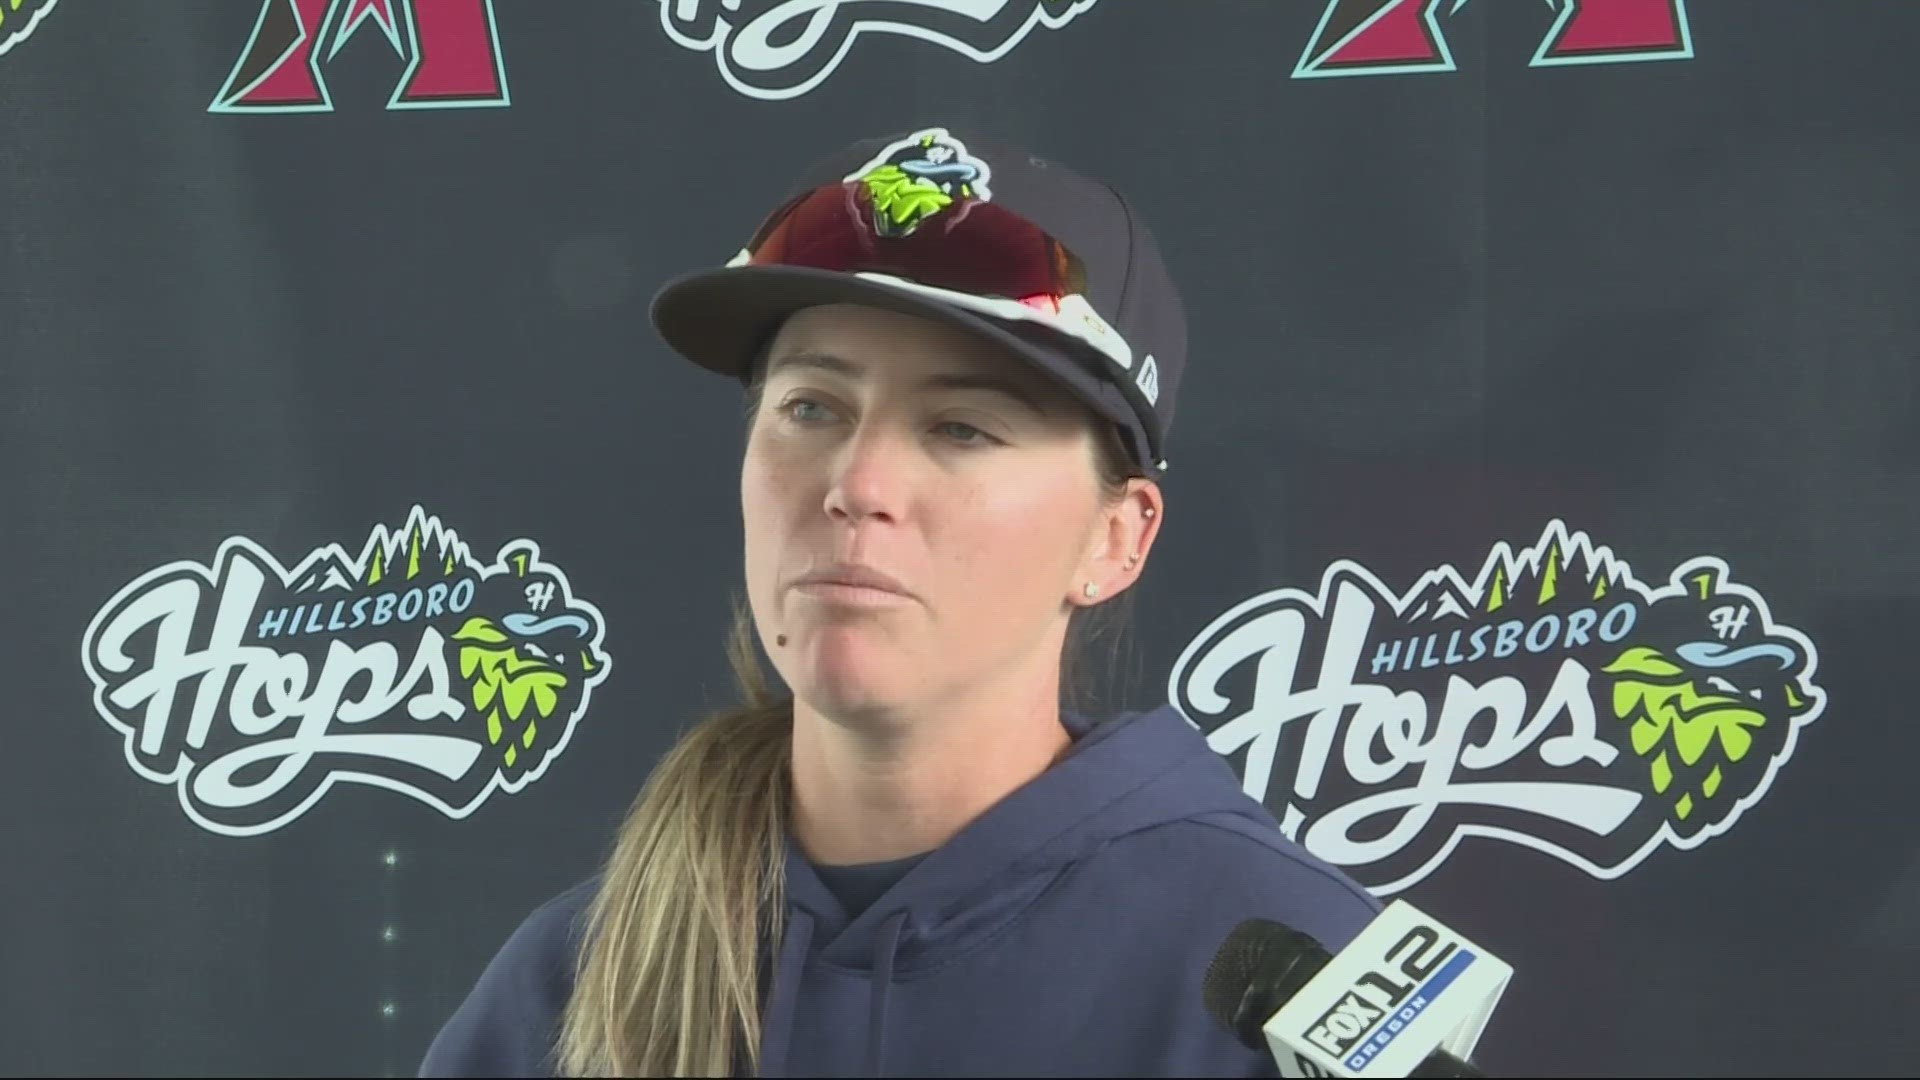 New Hillsboro Hops manager, Ronnie Gajownik, gets historic first win